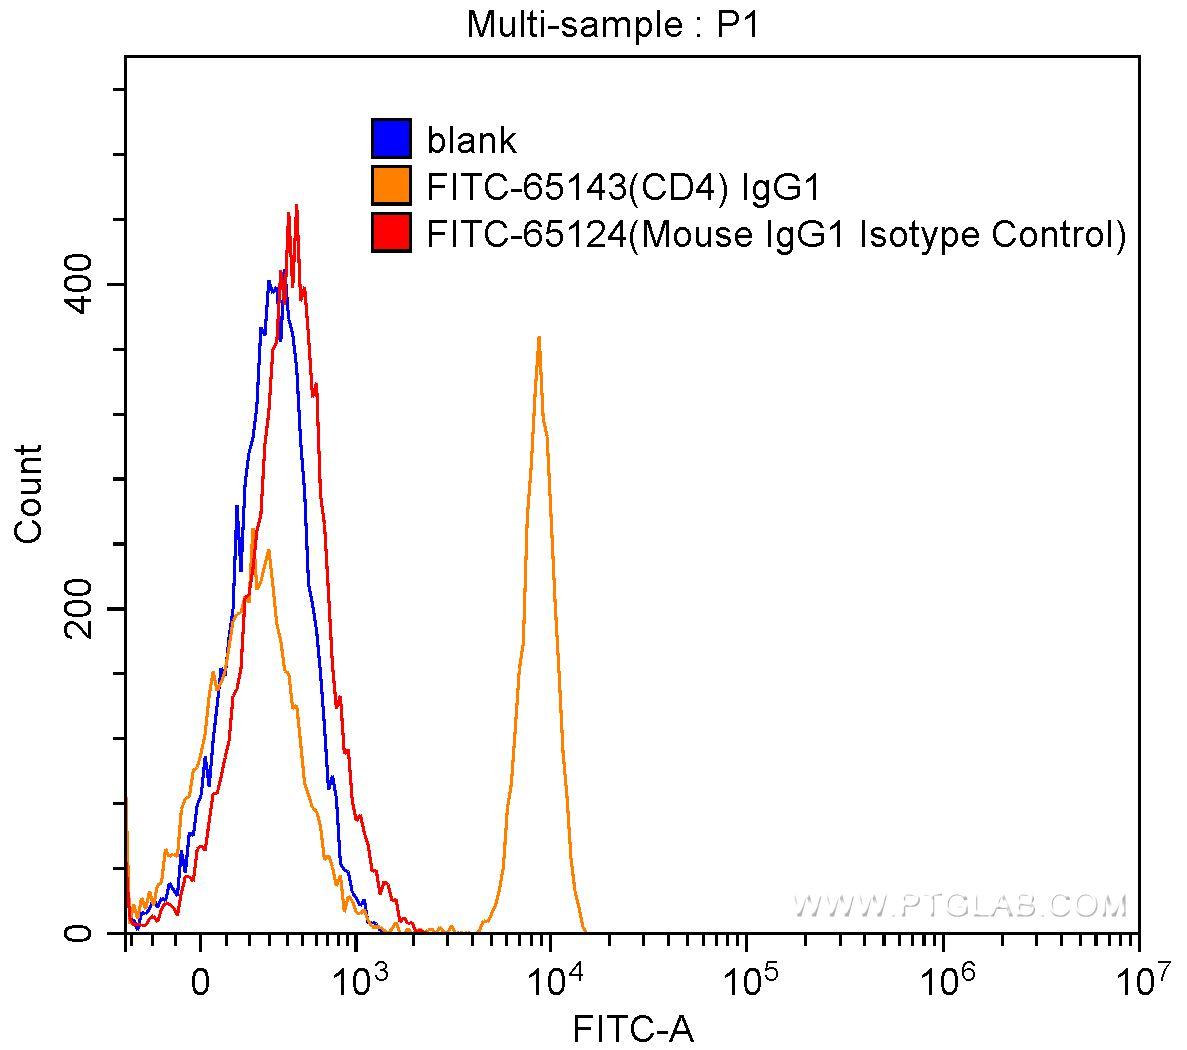 1X10^6 human peripheral blood lymphocytes were surface stained with 0.50 ug FITC Mouse IgG1 Isotype Control (FITC-65124, clone: MOPC-21) (red) or with 0.50 ug FITC Anti-Human CD4 (FITC-65143, clone: RPA-T4) (orange), or not stained (blank) (blue). Samples were not fixed.